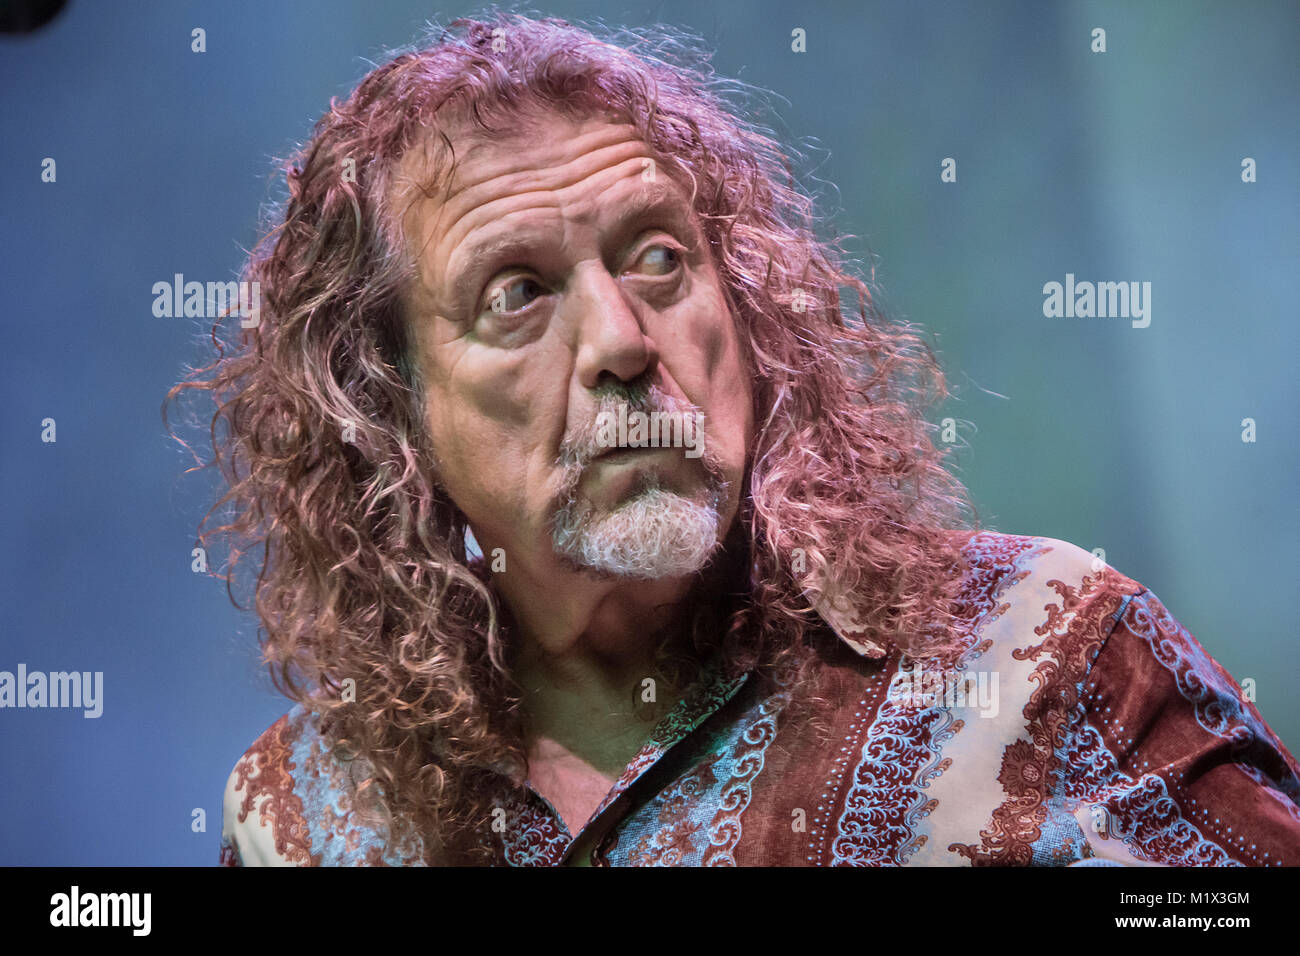 The English singer, songwriter and musician Robert Plant performs a live  concert with the band The Sensational Space Shifters at the Norwegian music  festival Bergenfest 2014. Robert Plant is best known as